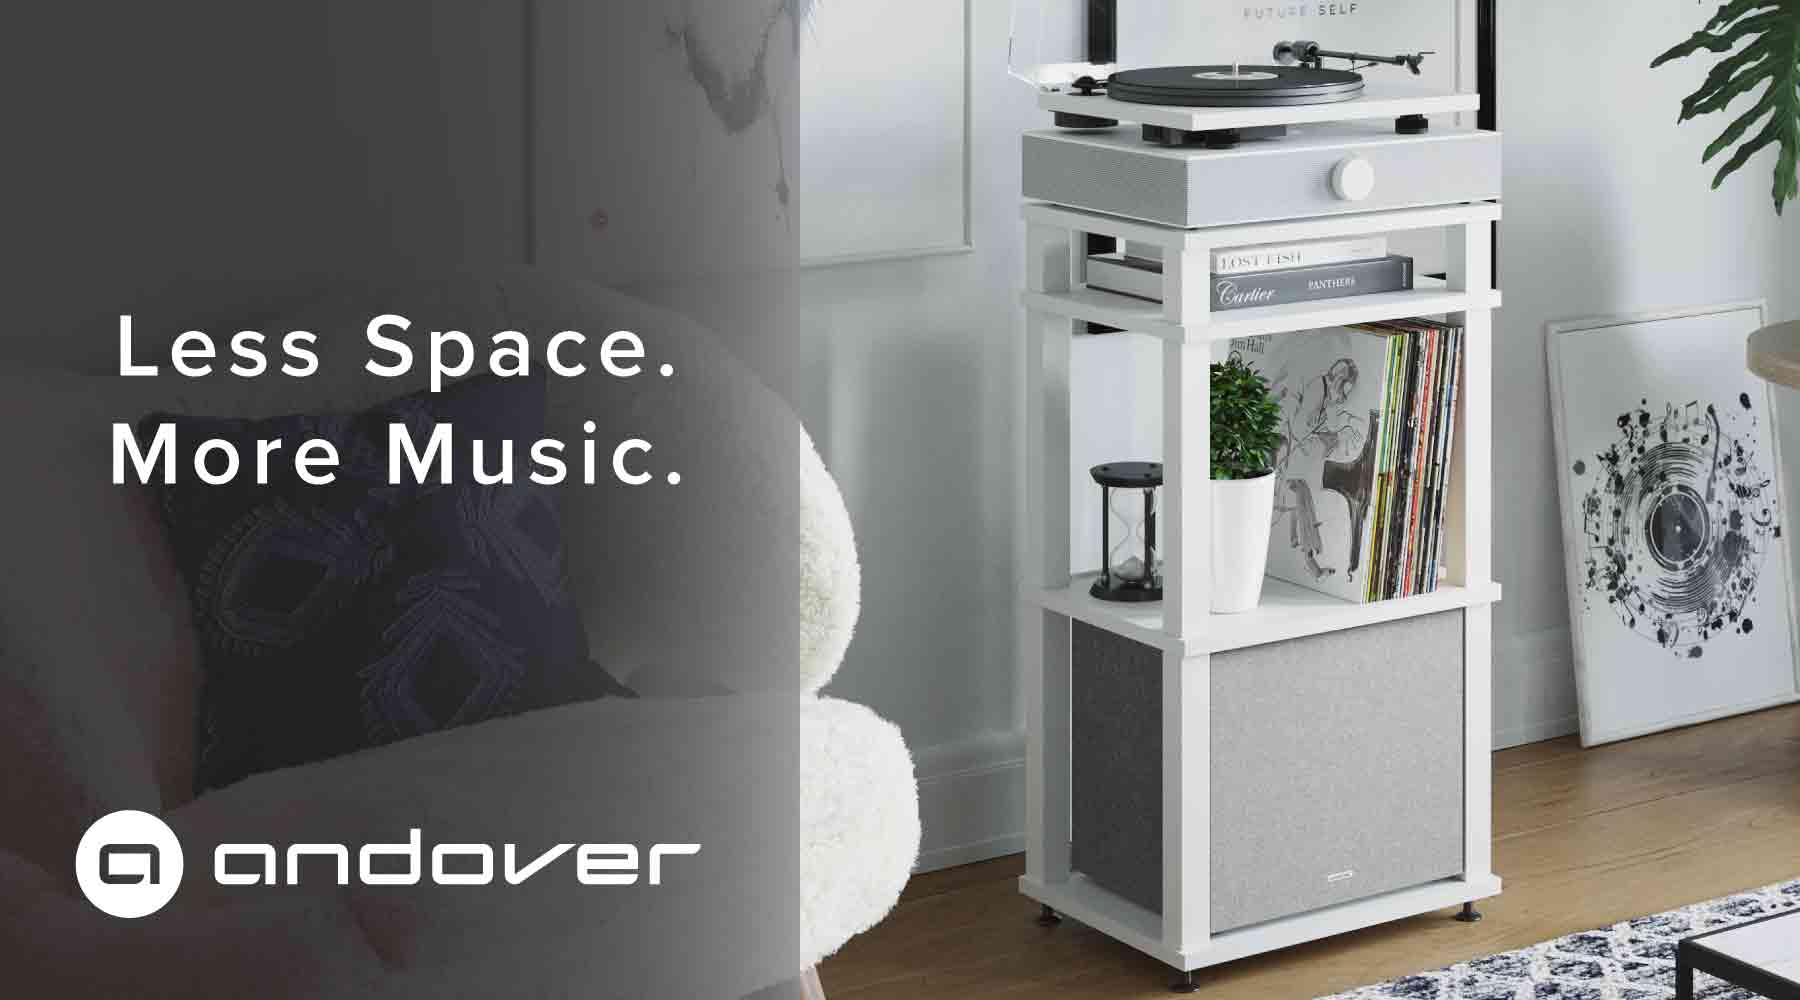 Less space more music!